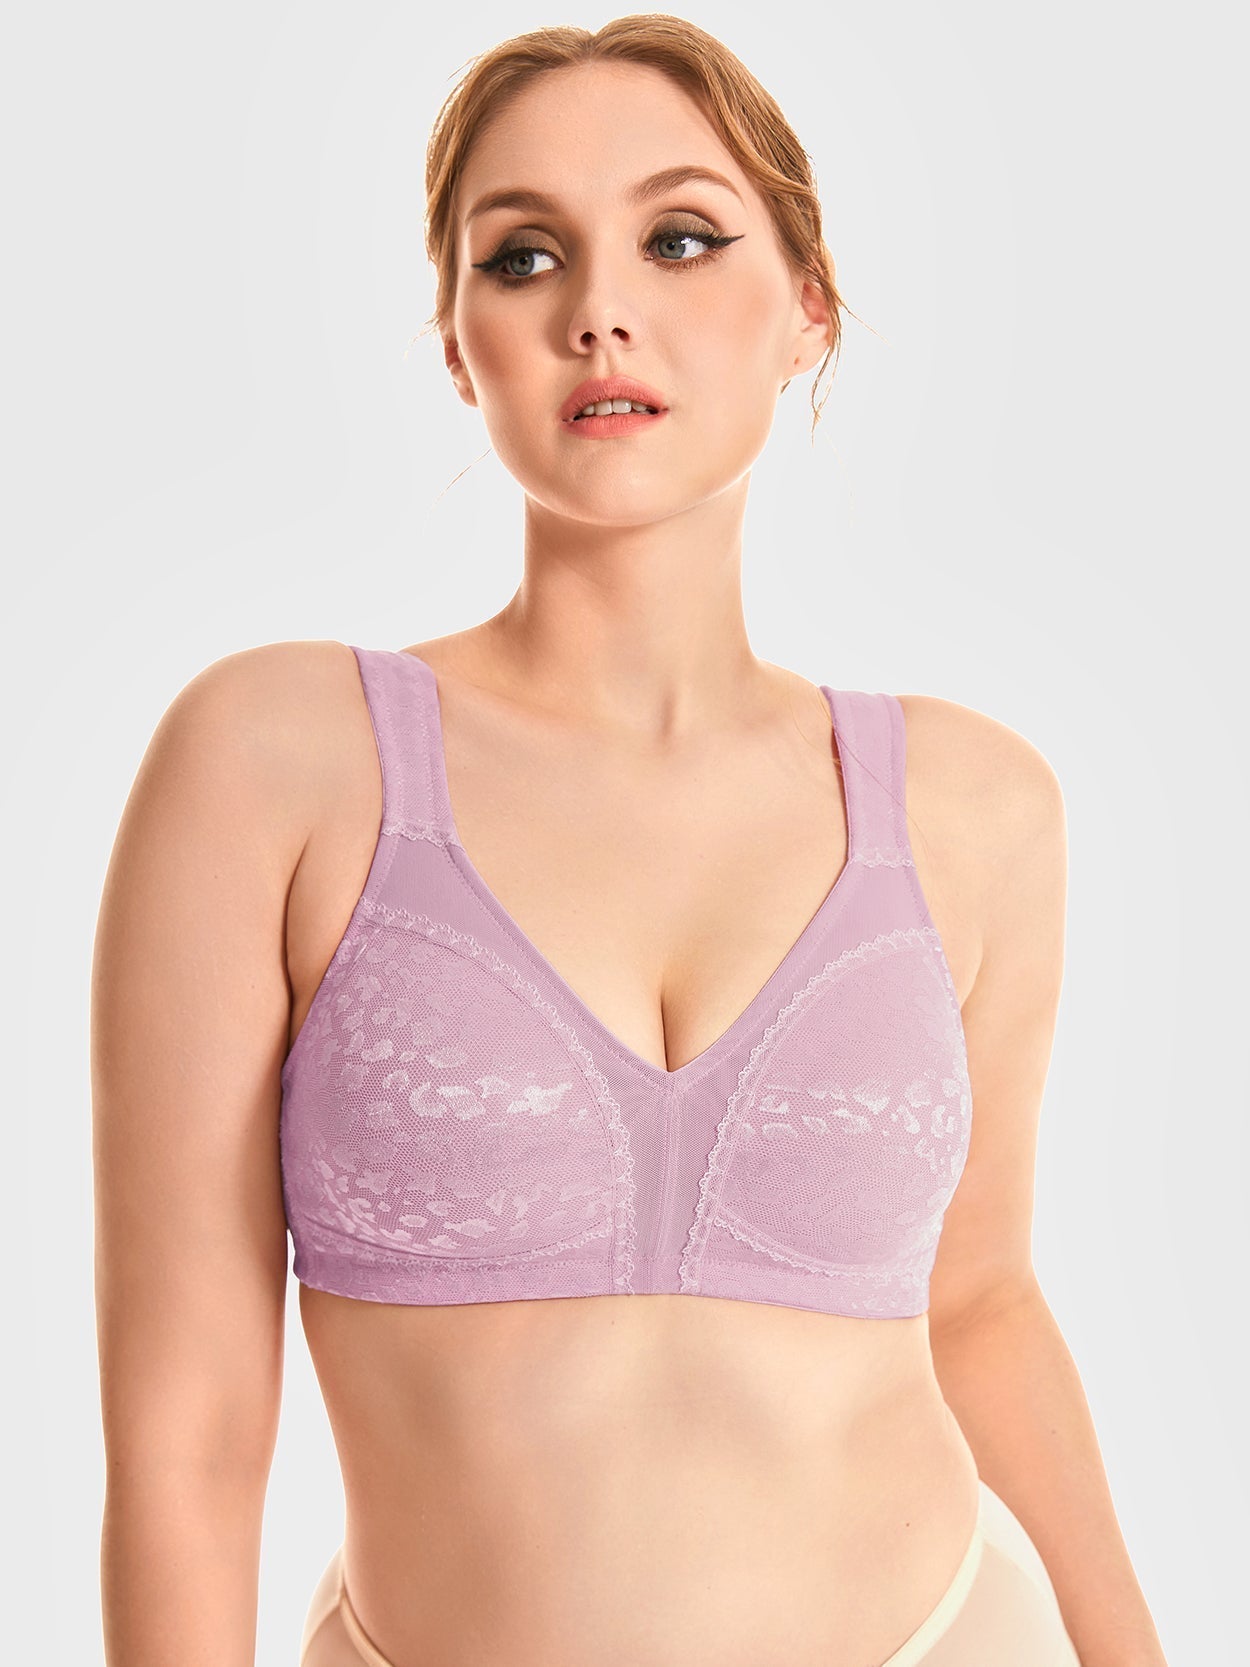 Women's Minimiser Support 100% Cotton Non-Padded Full Coverage Bra, Wireless/Wire-Free